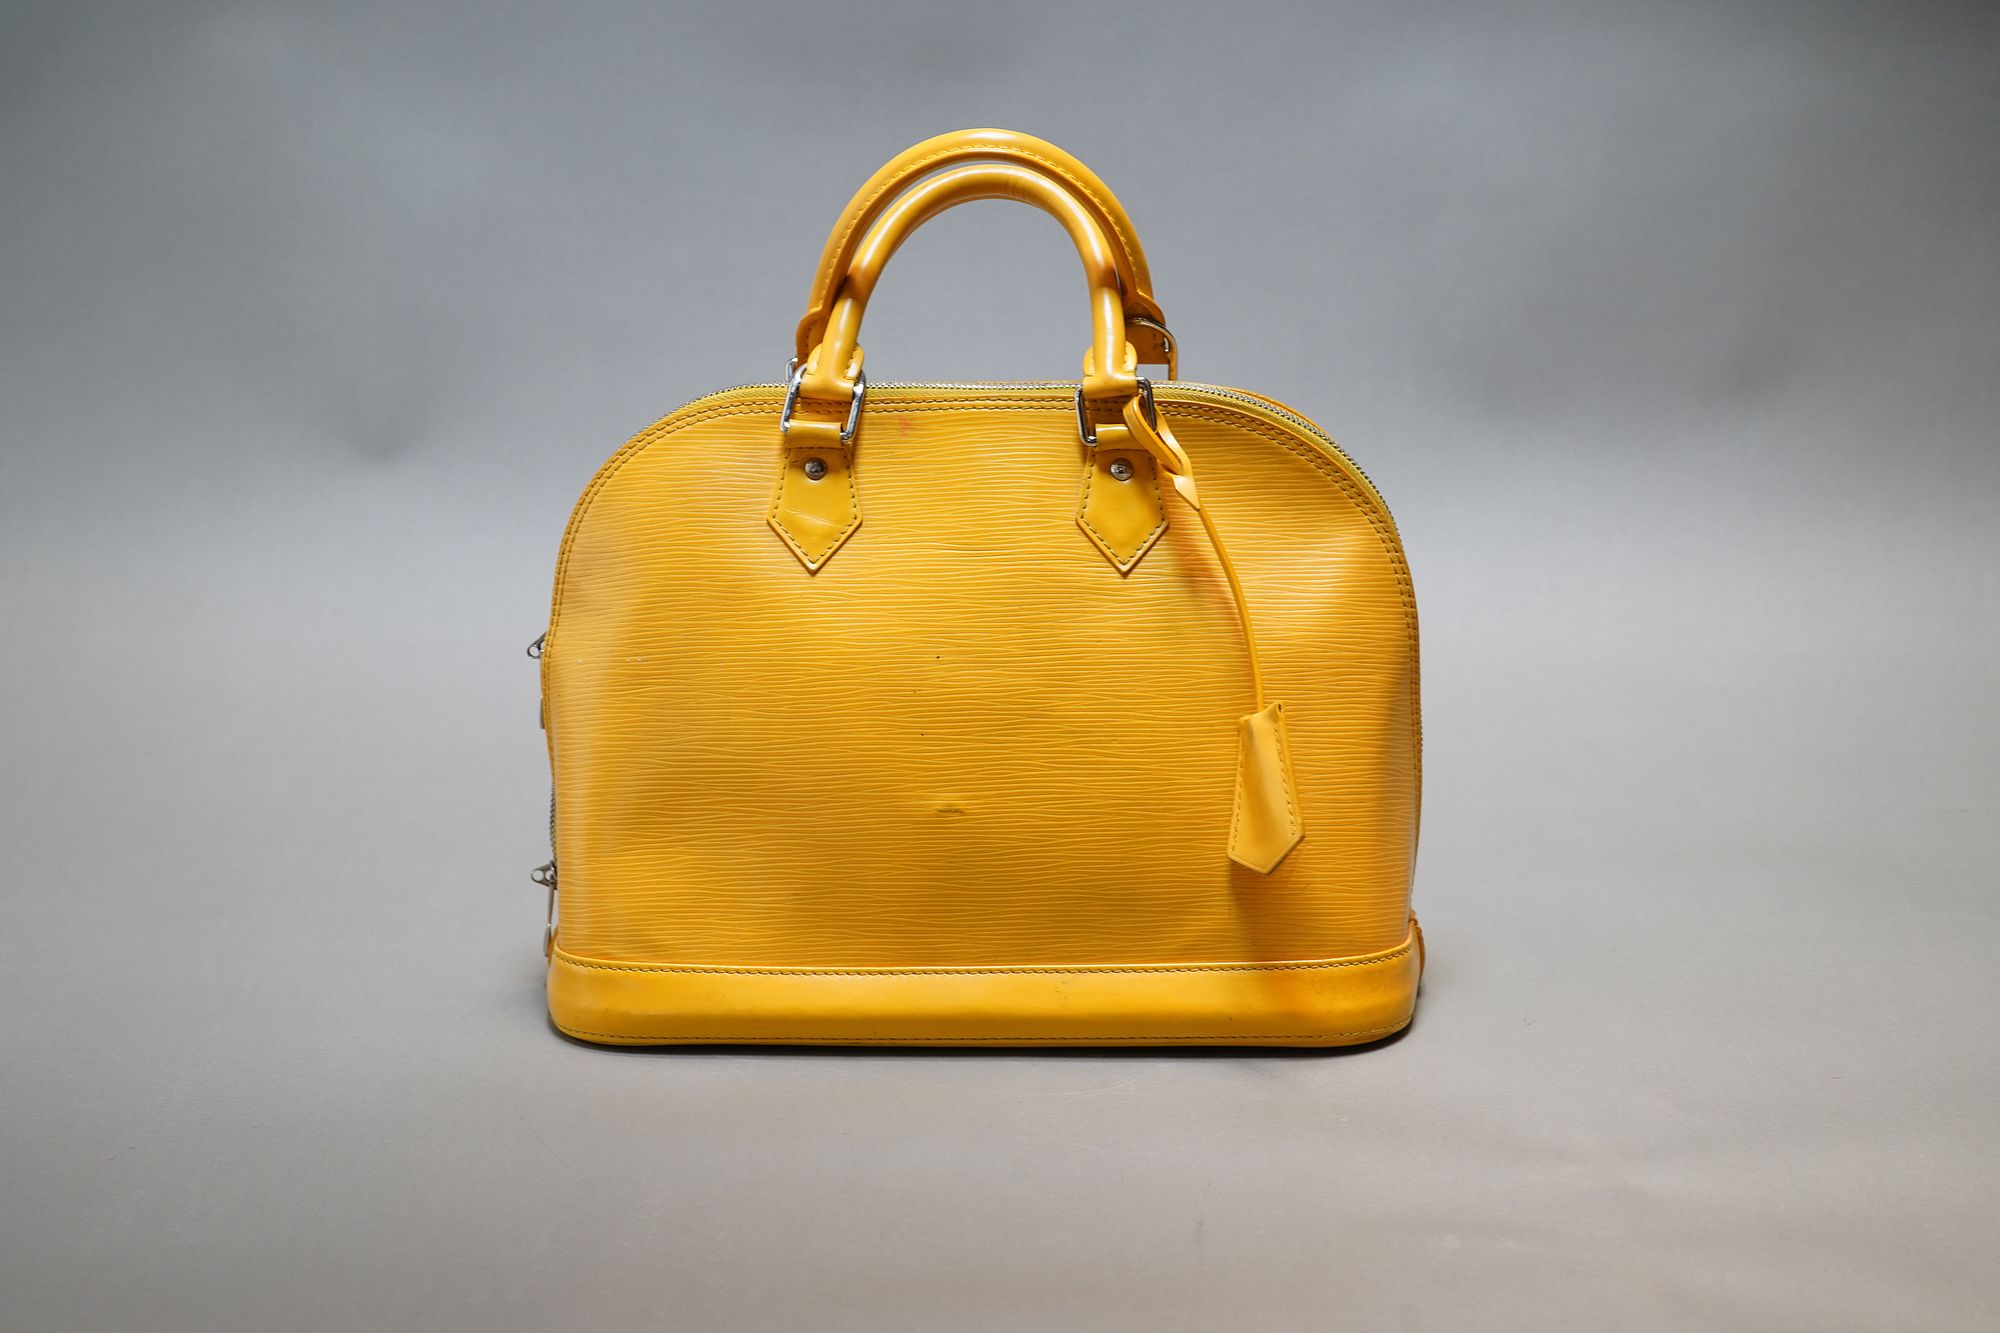 A LOUIS VUITTON YELLOW ALMA HANDBAG EPI LEATHER for sale at auction on 26th  August